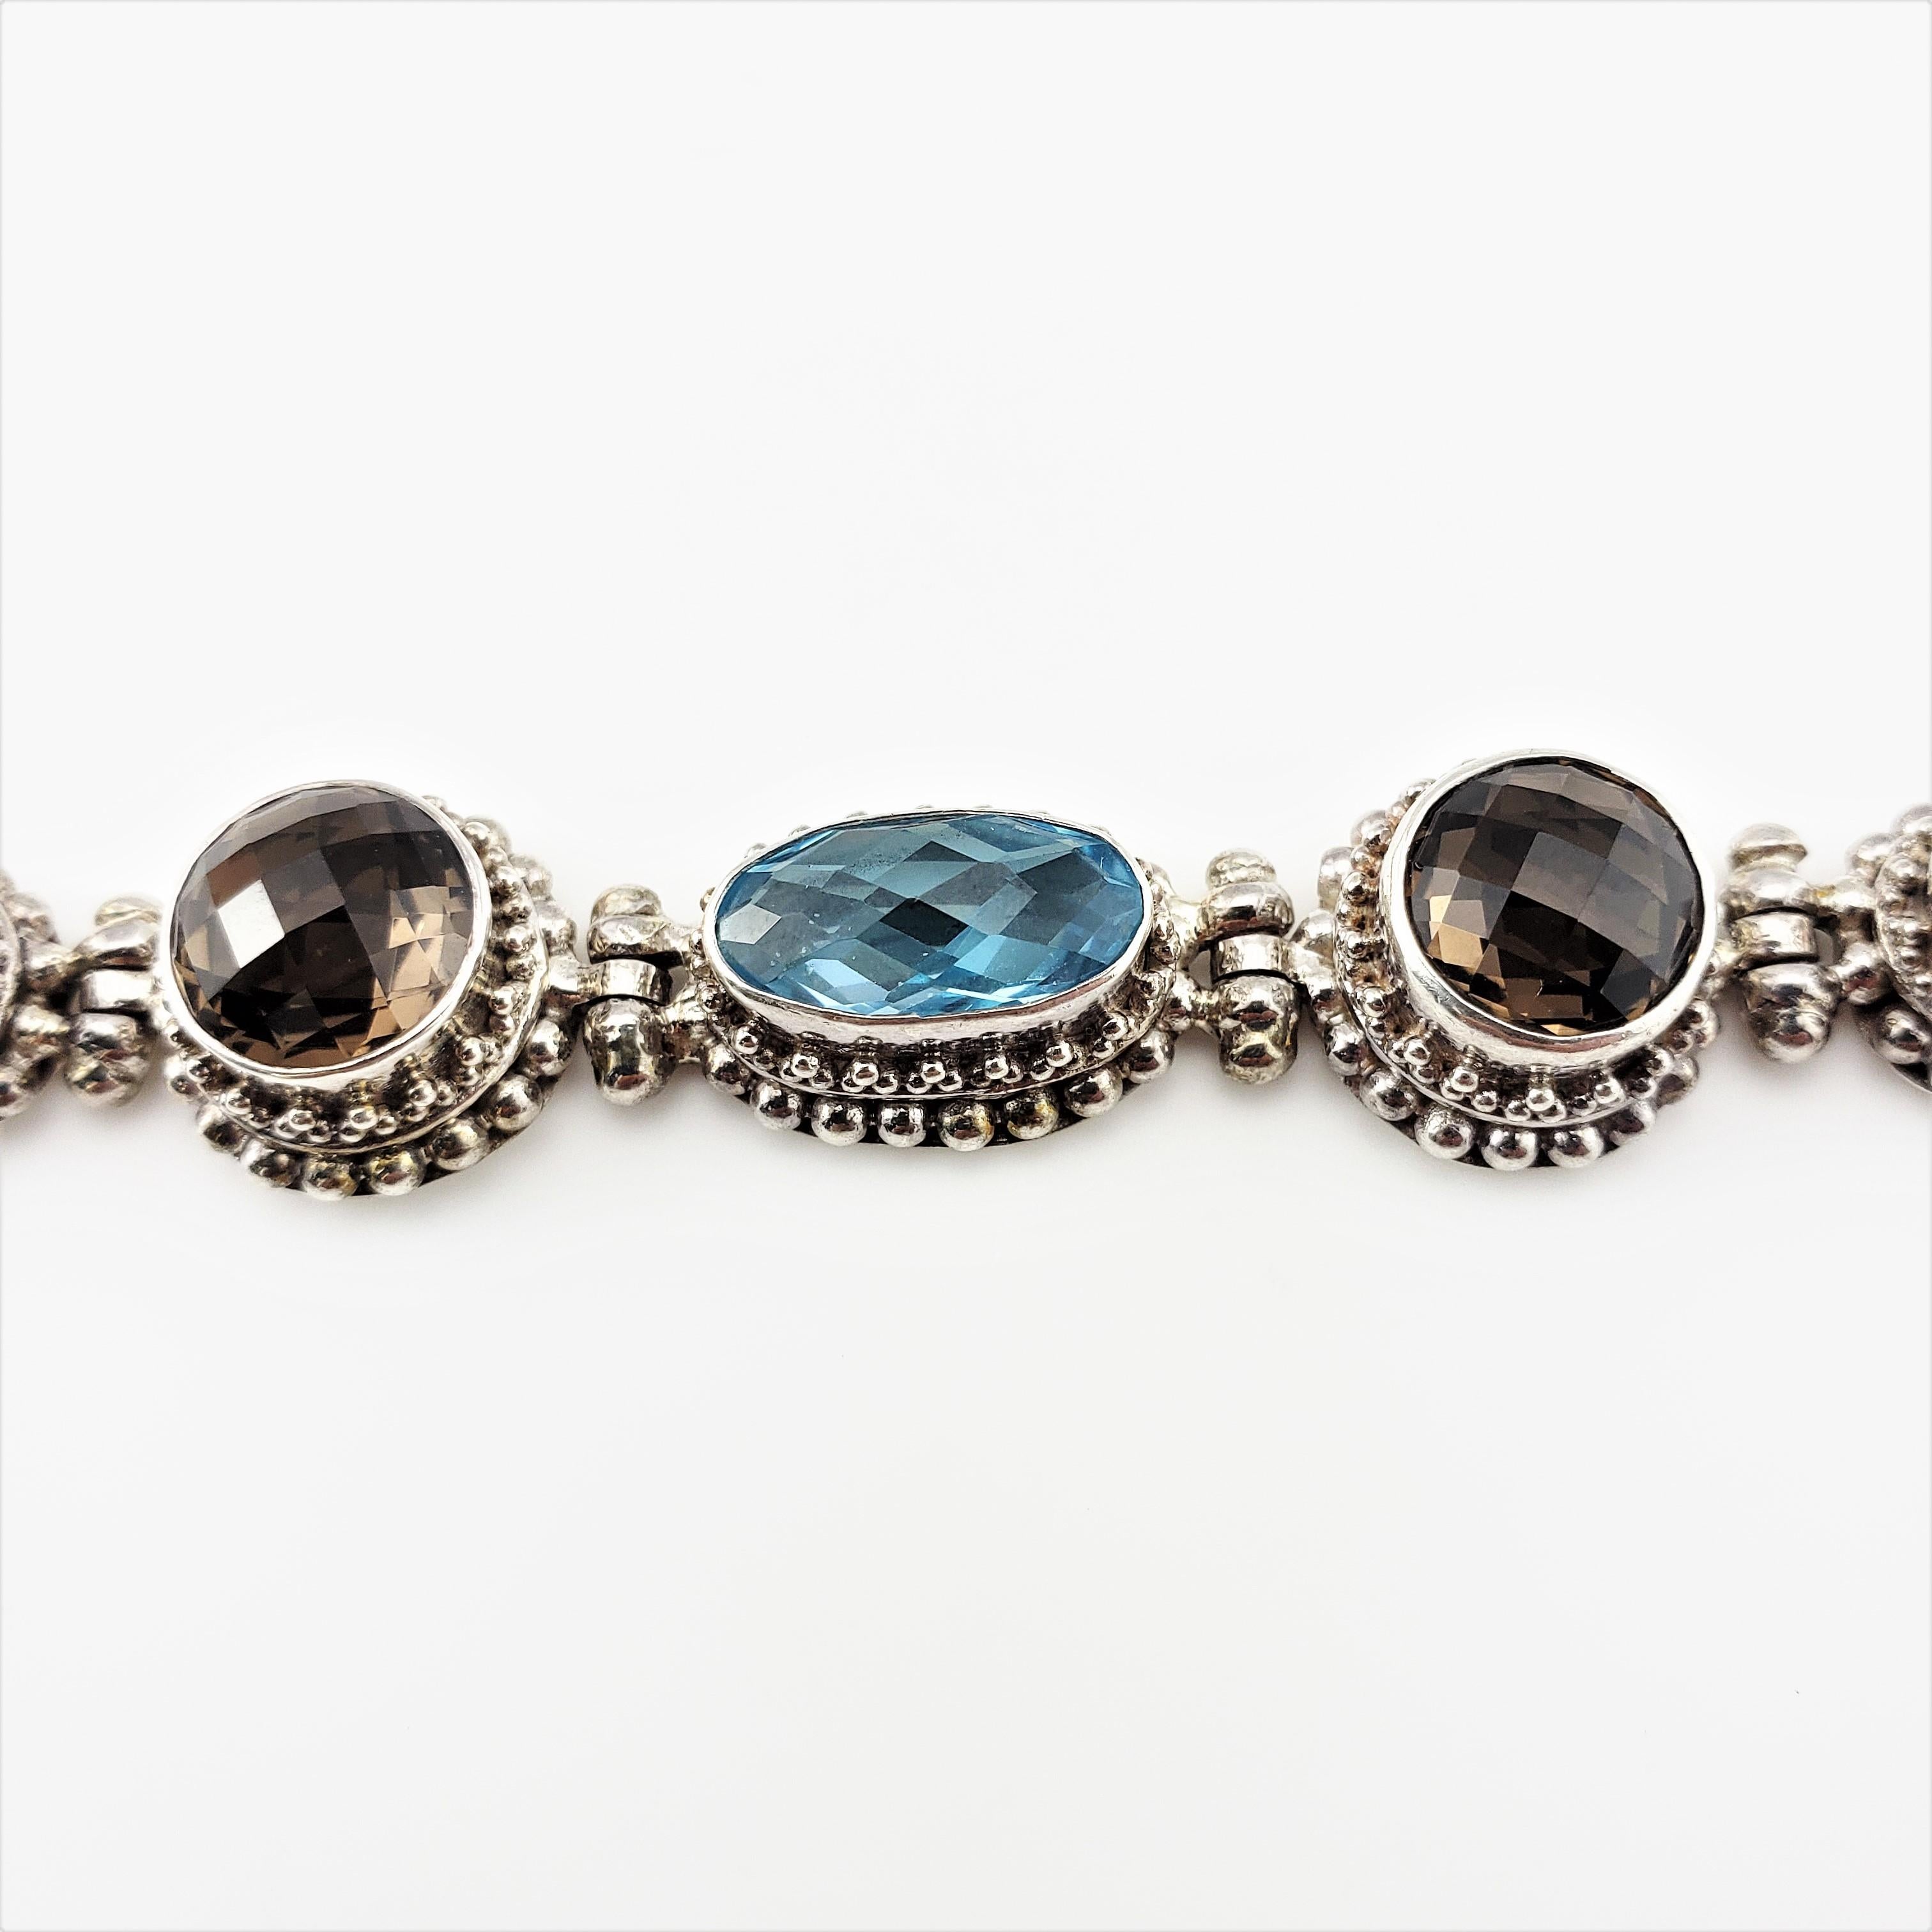 Oval Cut Bali Indonesia Sterling Silver Blue and Brown Topaz Flexible Toggle Bracelet